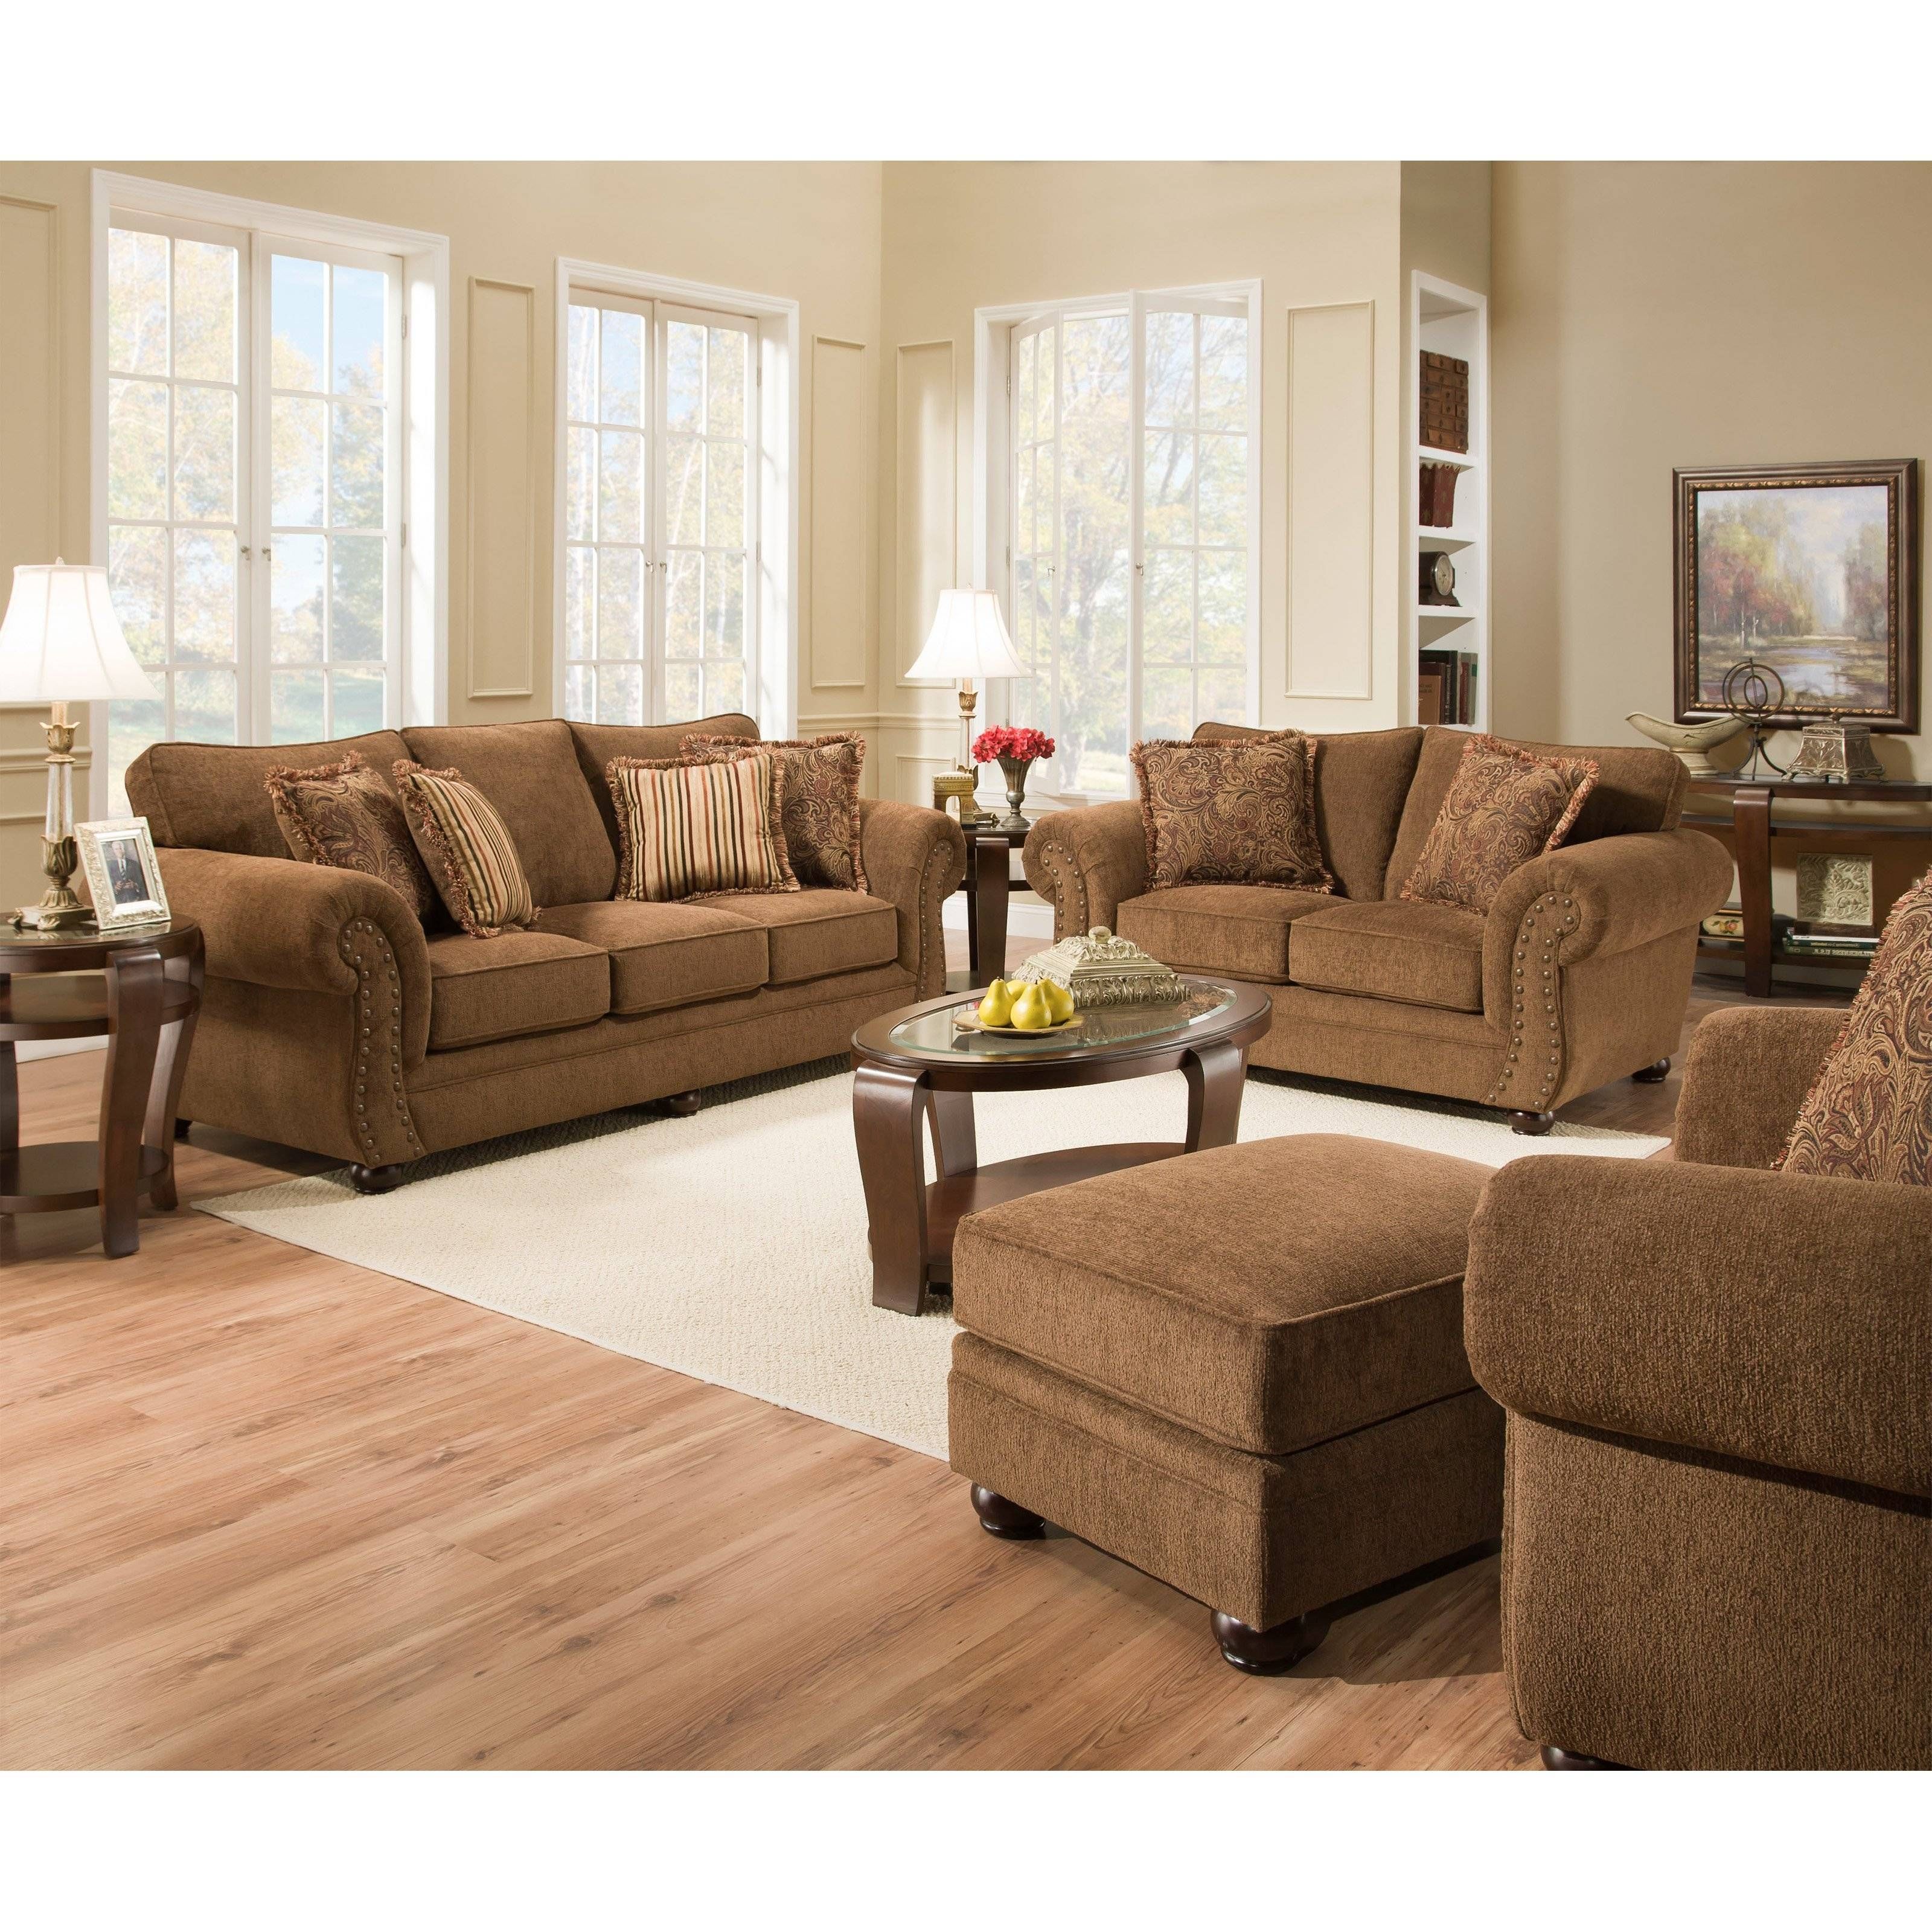 Simmons Upholstery Outback Chocolate Sofa Set | Hayneedle Intended For Simmons Sofas And Loveseats (Photo 2 of 15)